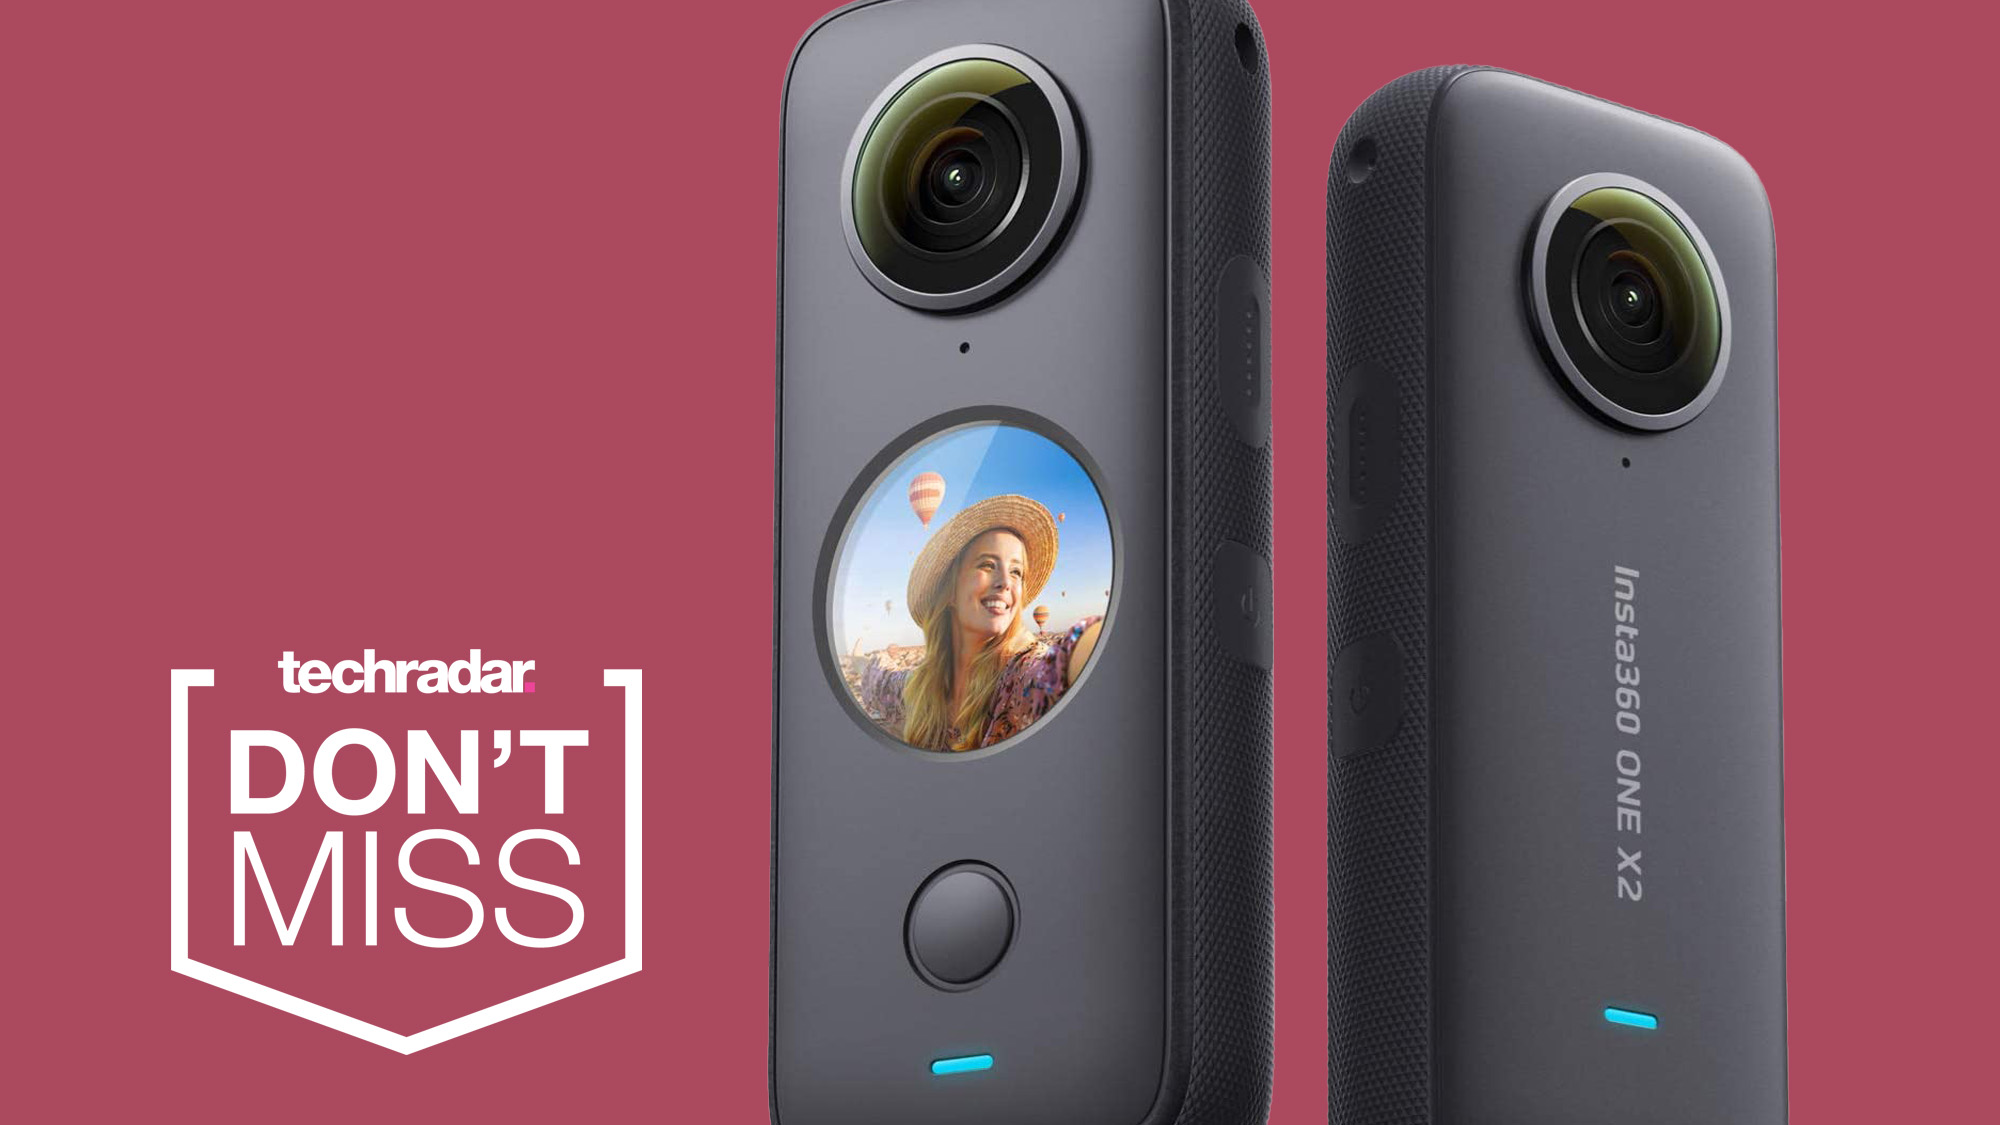 Insta360 One X2, one of best and most famous action cameras, is at a  record-low price